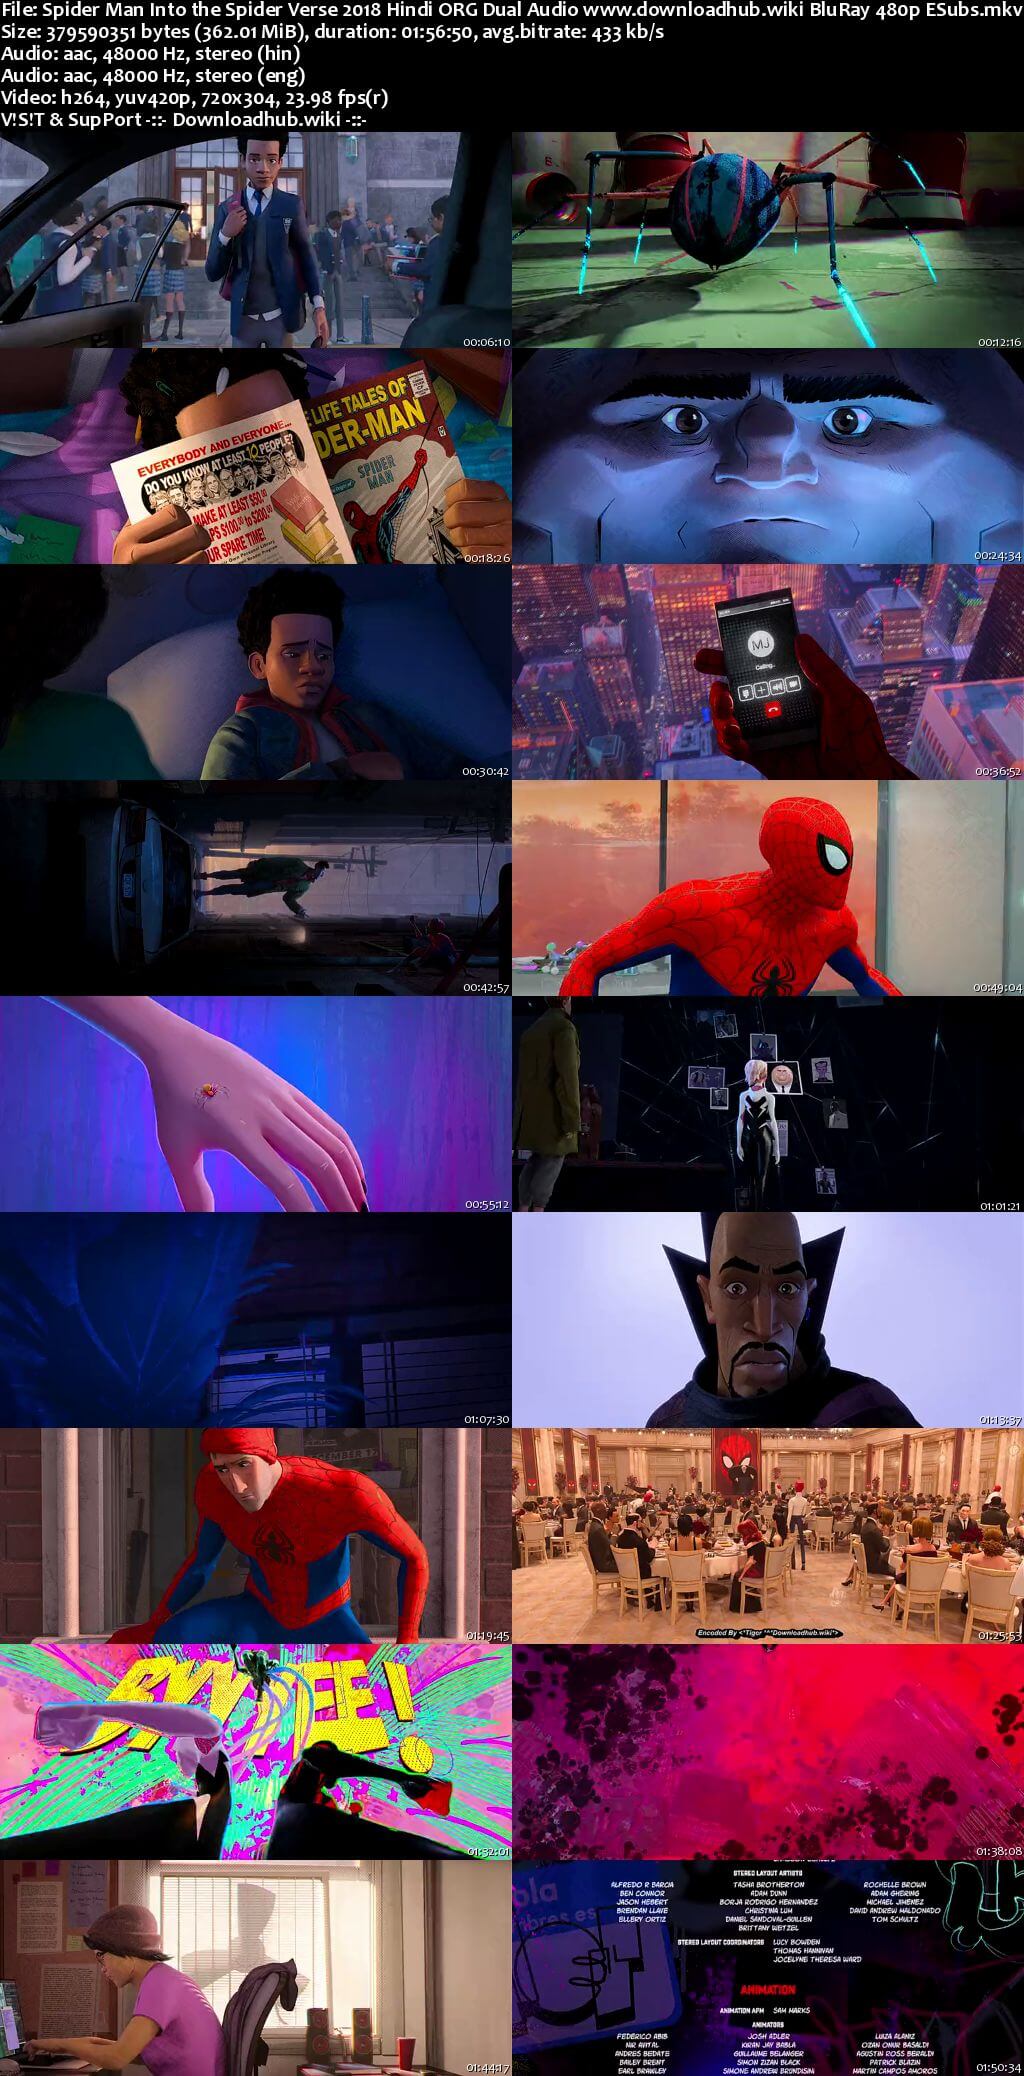 Spider Man Into the Spider Verse 2018 Hindi ORG Dual Audio 350MB BluRay 480p ESubs